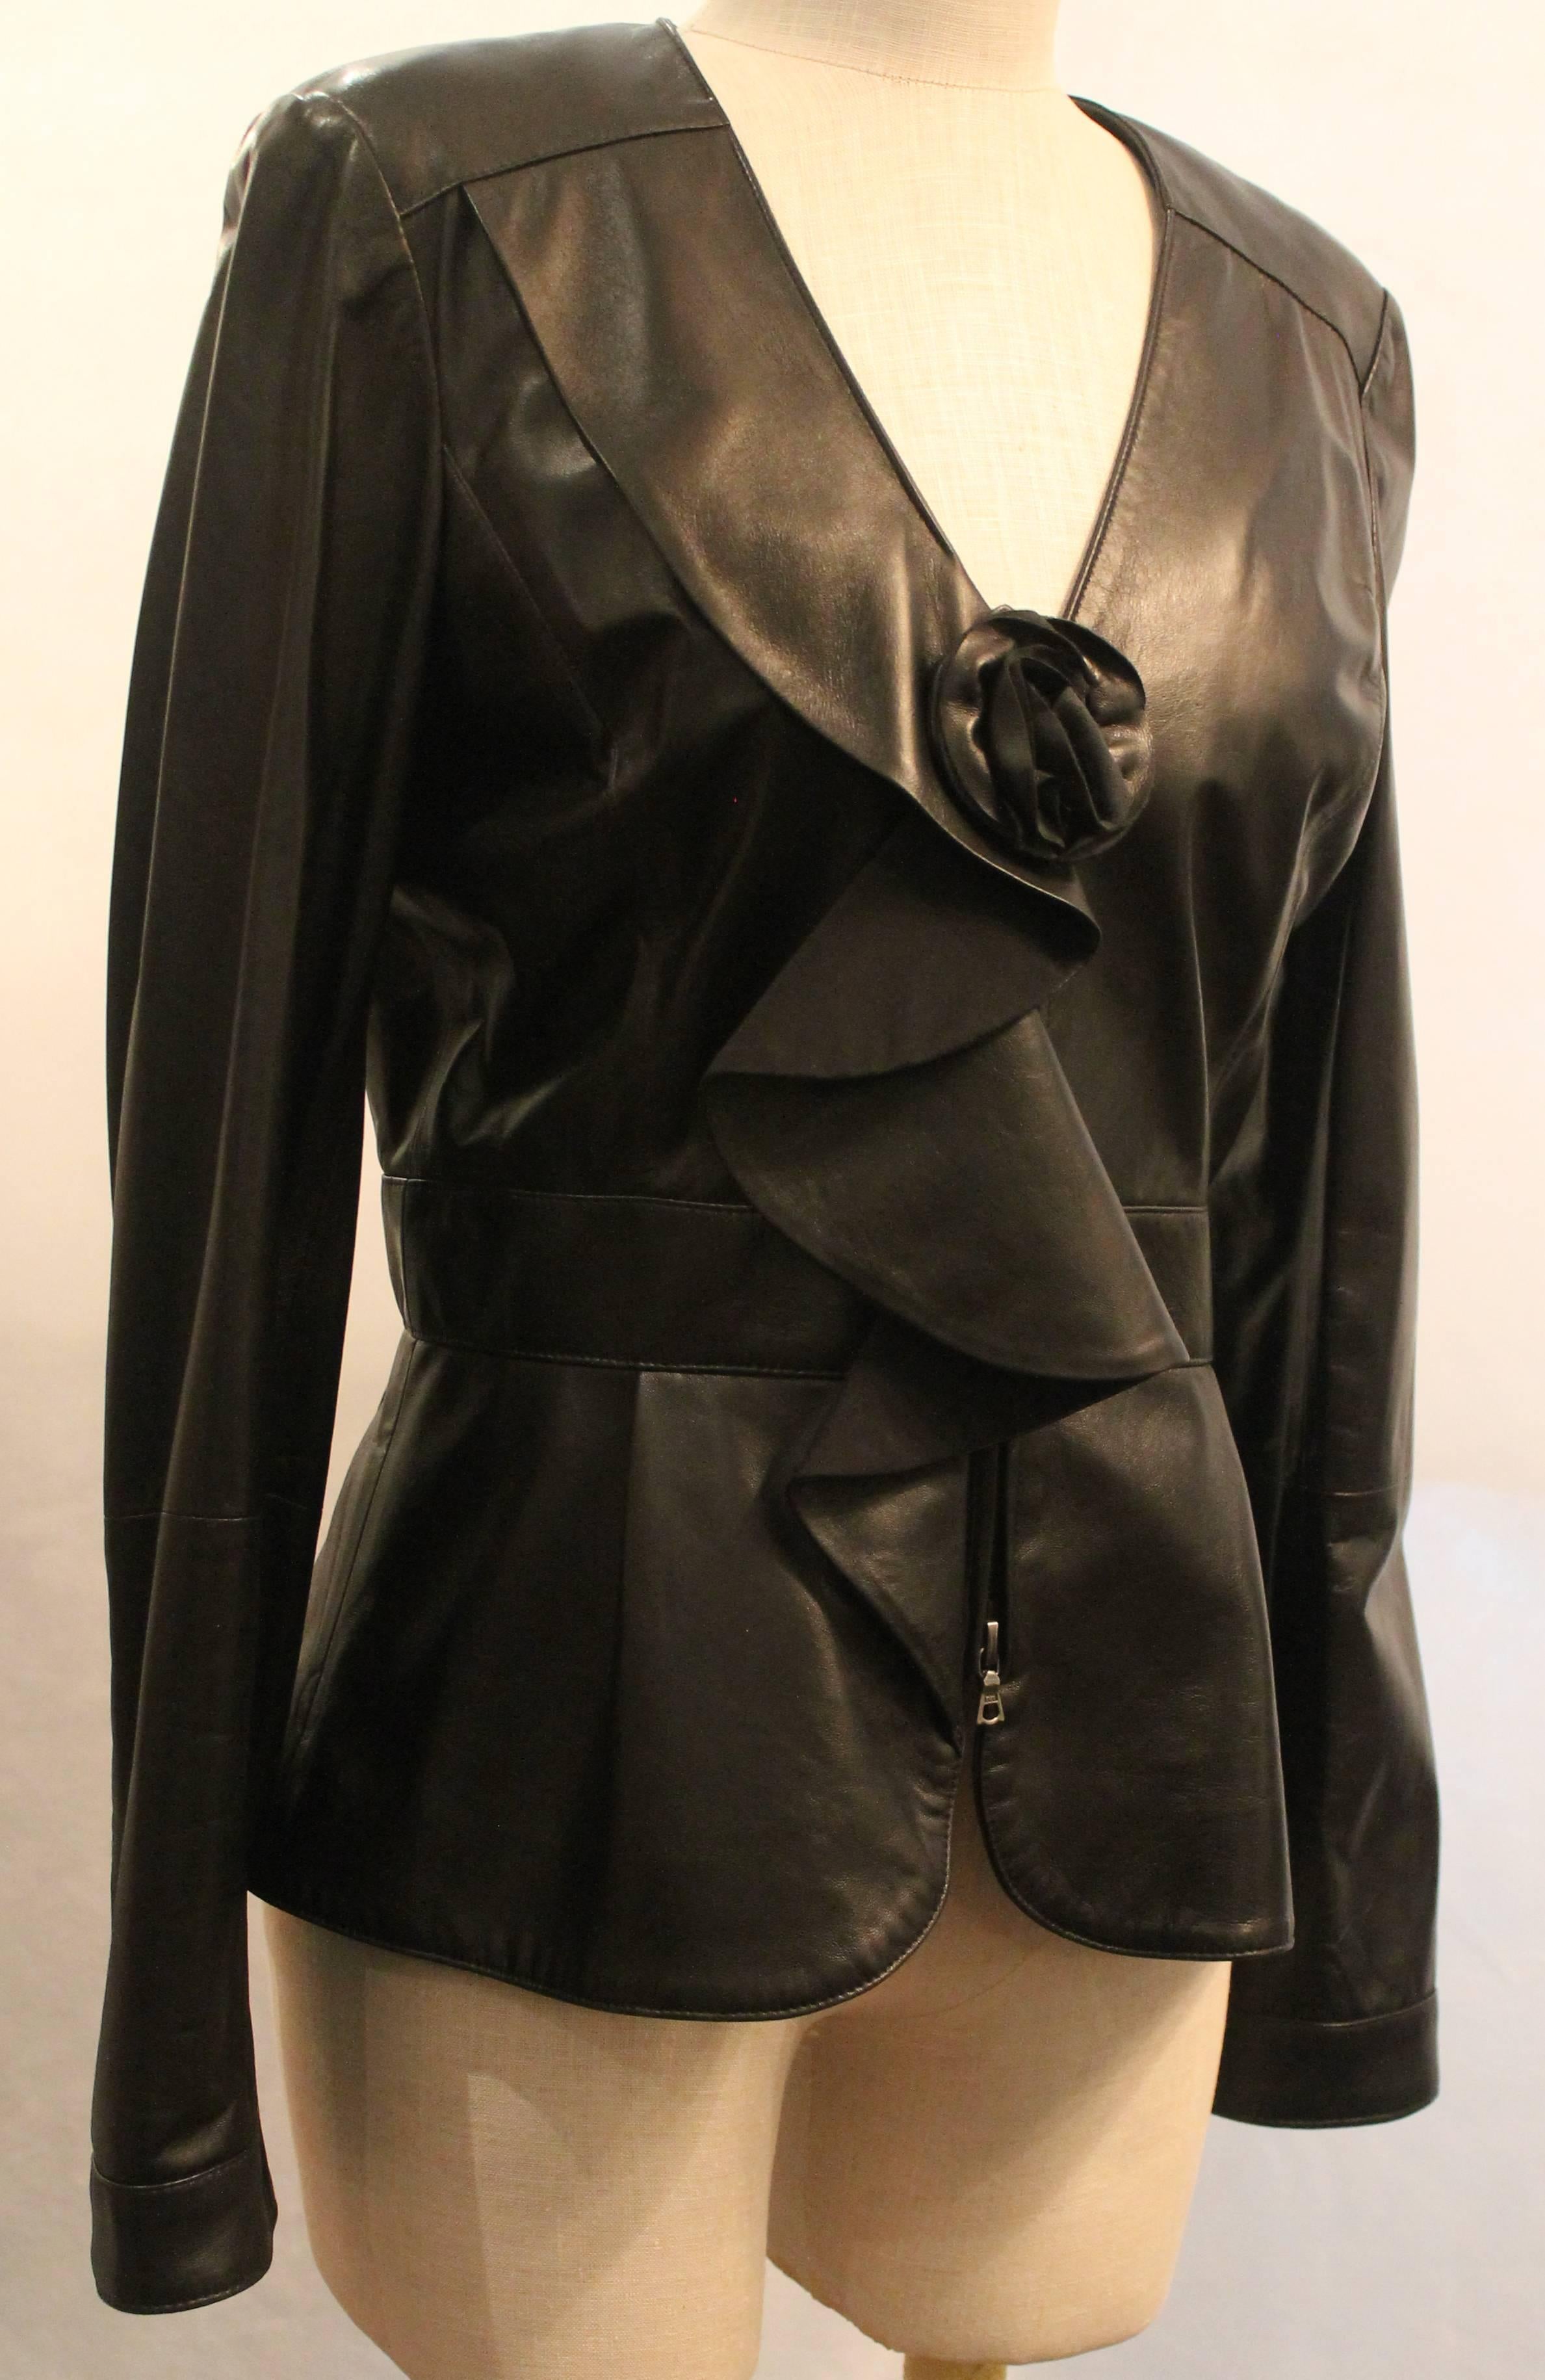 Oscar De La Renta Black Leather Zip front Jacket w/ Ruffle and Flower Detail - 10 The jacket is NEW WITH TAGS. and retailed for $2,490 in 2011. This jacket is fully lined in silk, has 4 metal snap buttons on each sleeve, is fitted until the waist